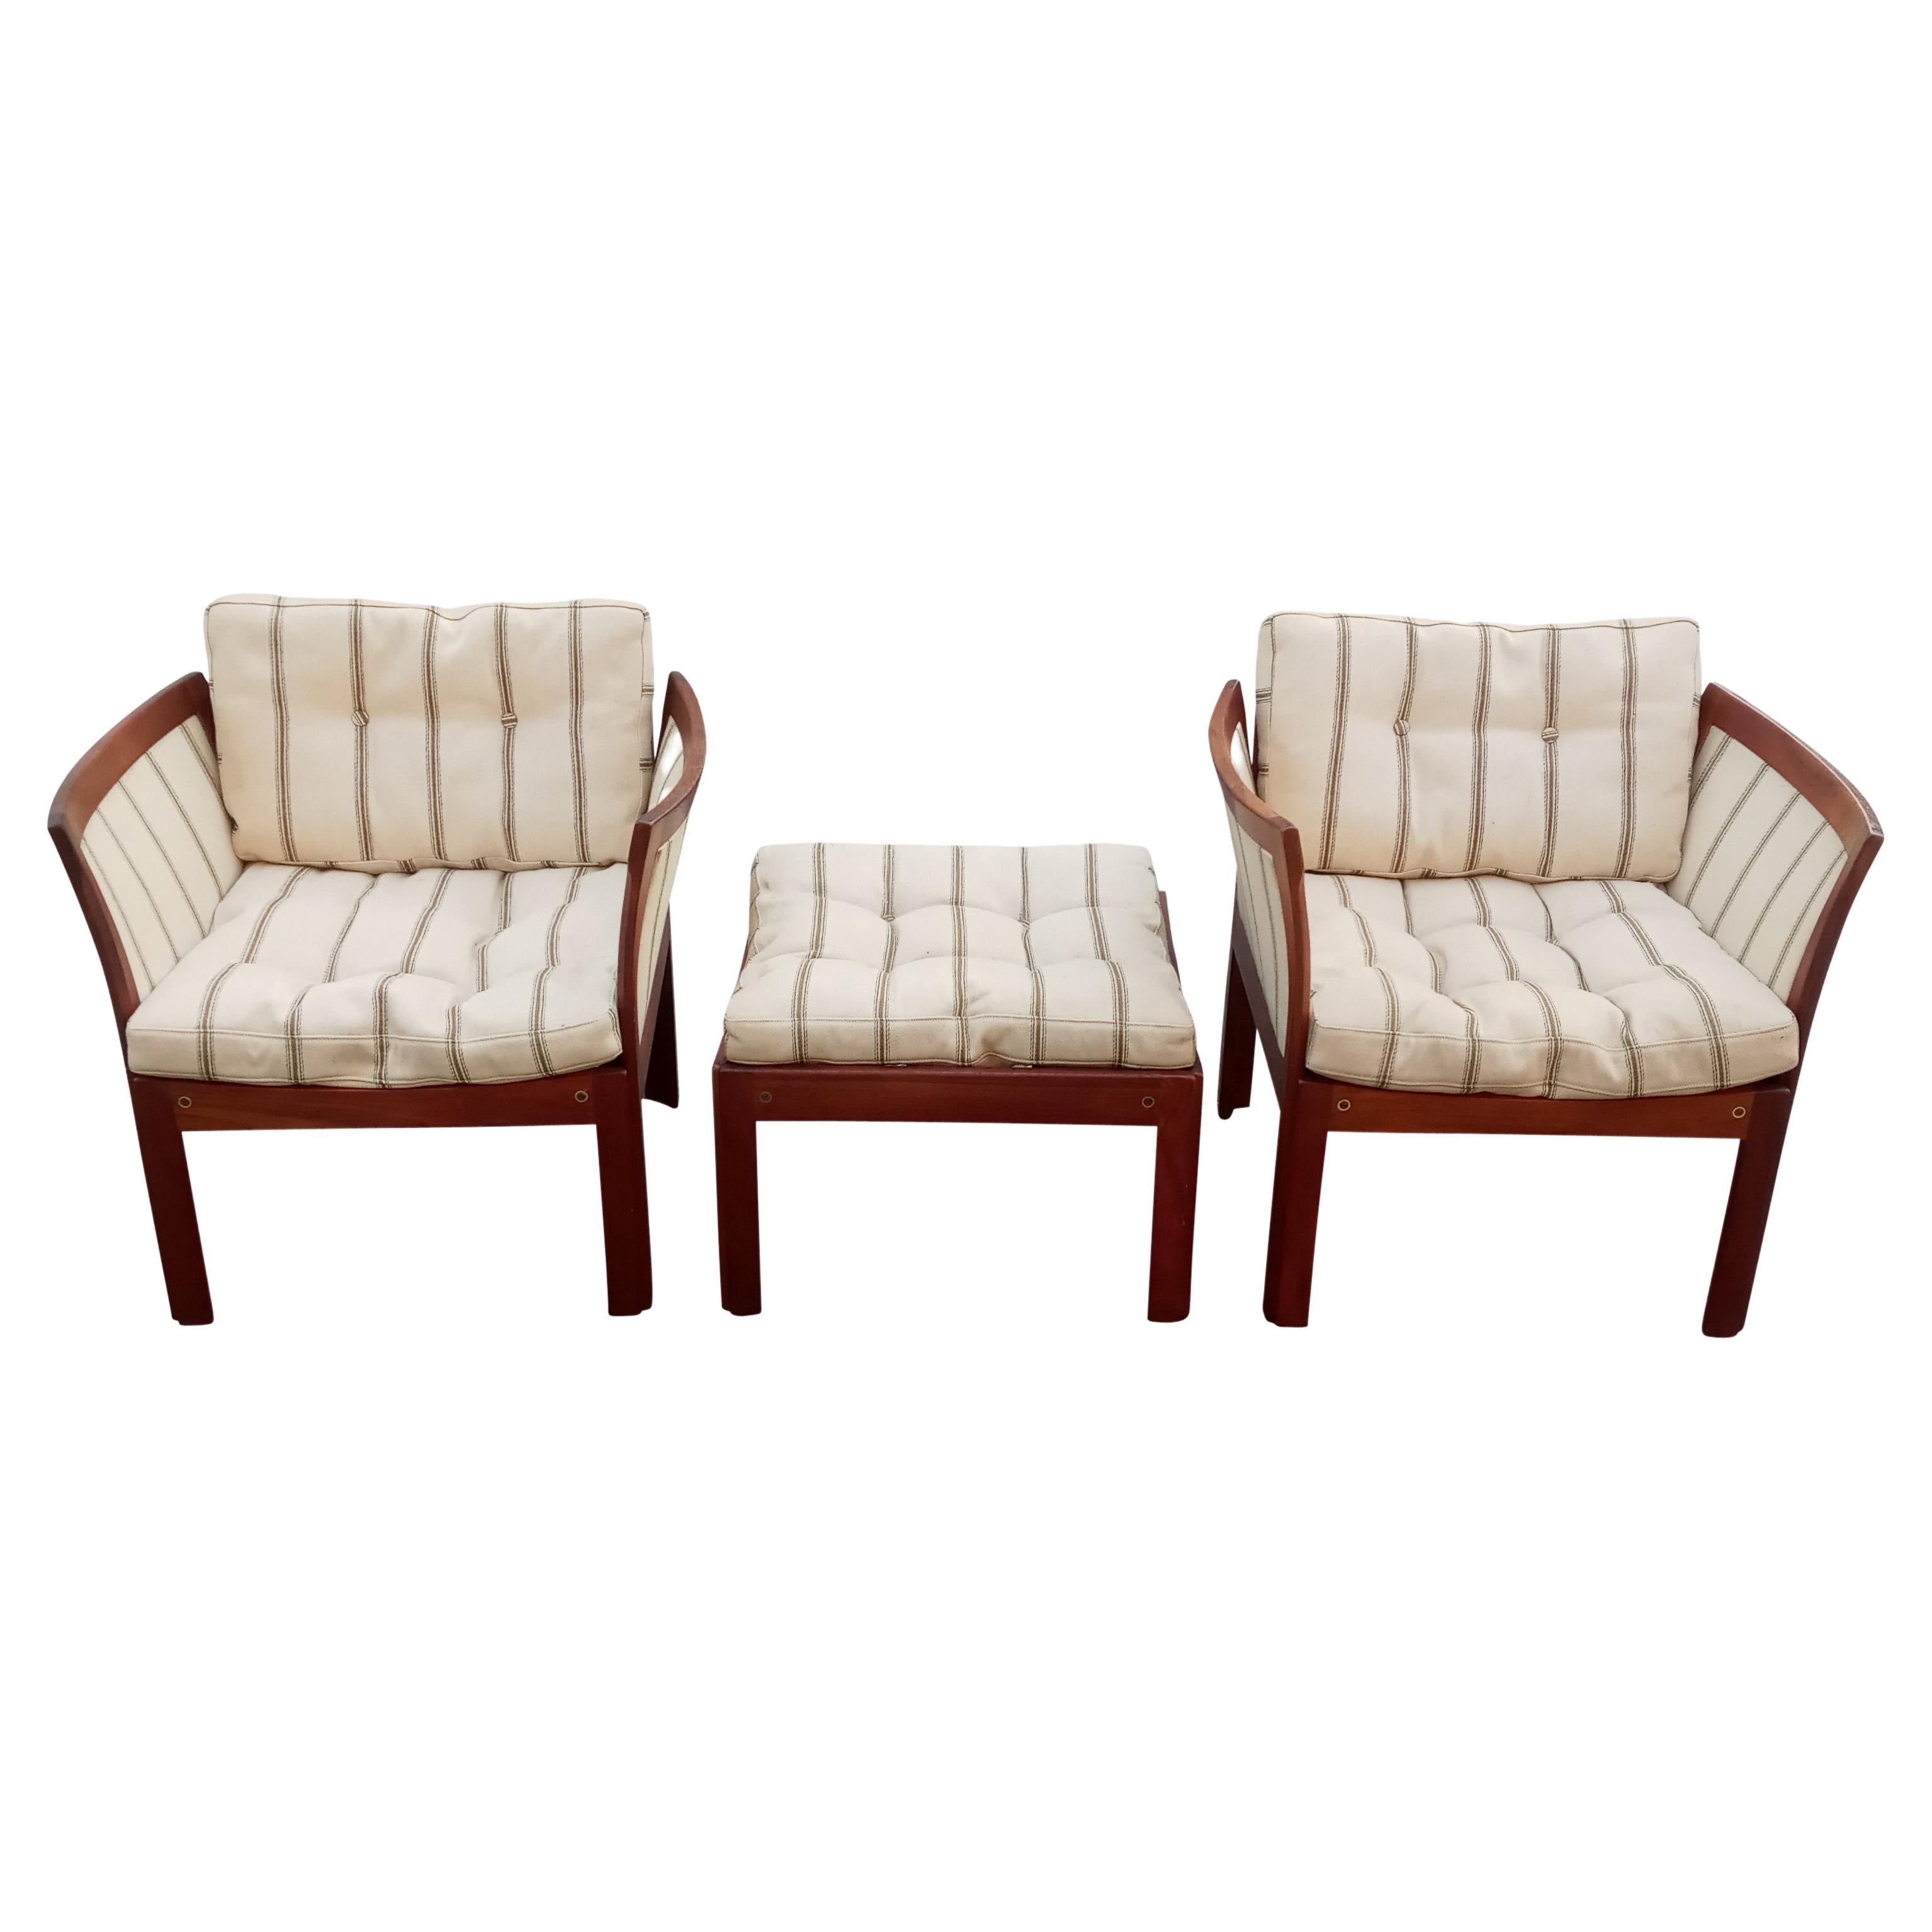 This vintage Danish set is constructed of teak and retains the original striped wool upholstery. The visual lightness of this Nordic styling is complemented by an unparalleled comfort. The finish on the frames shows a warm, natural patina. There is